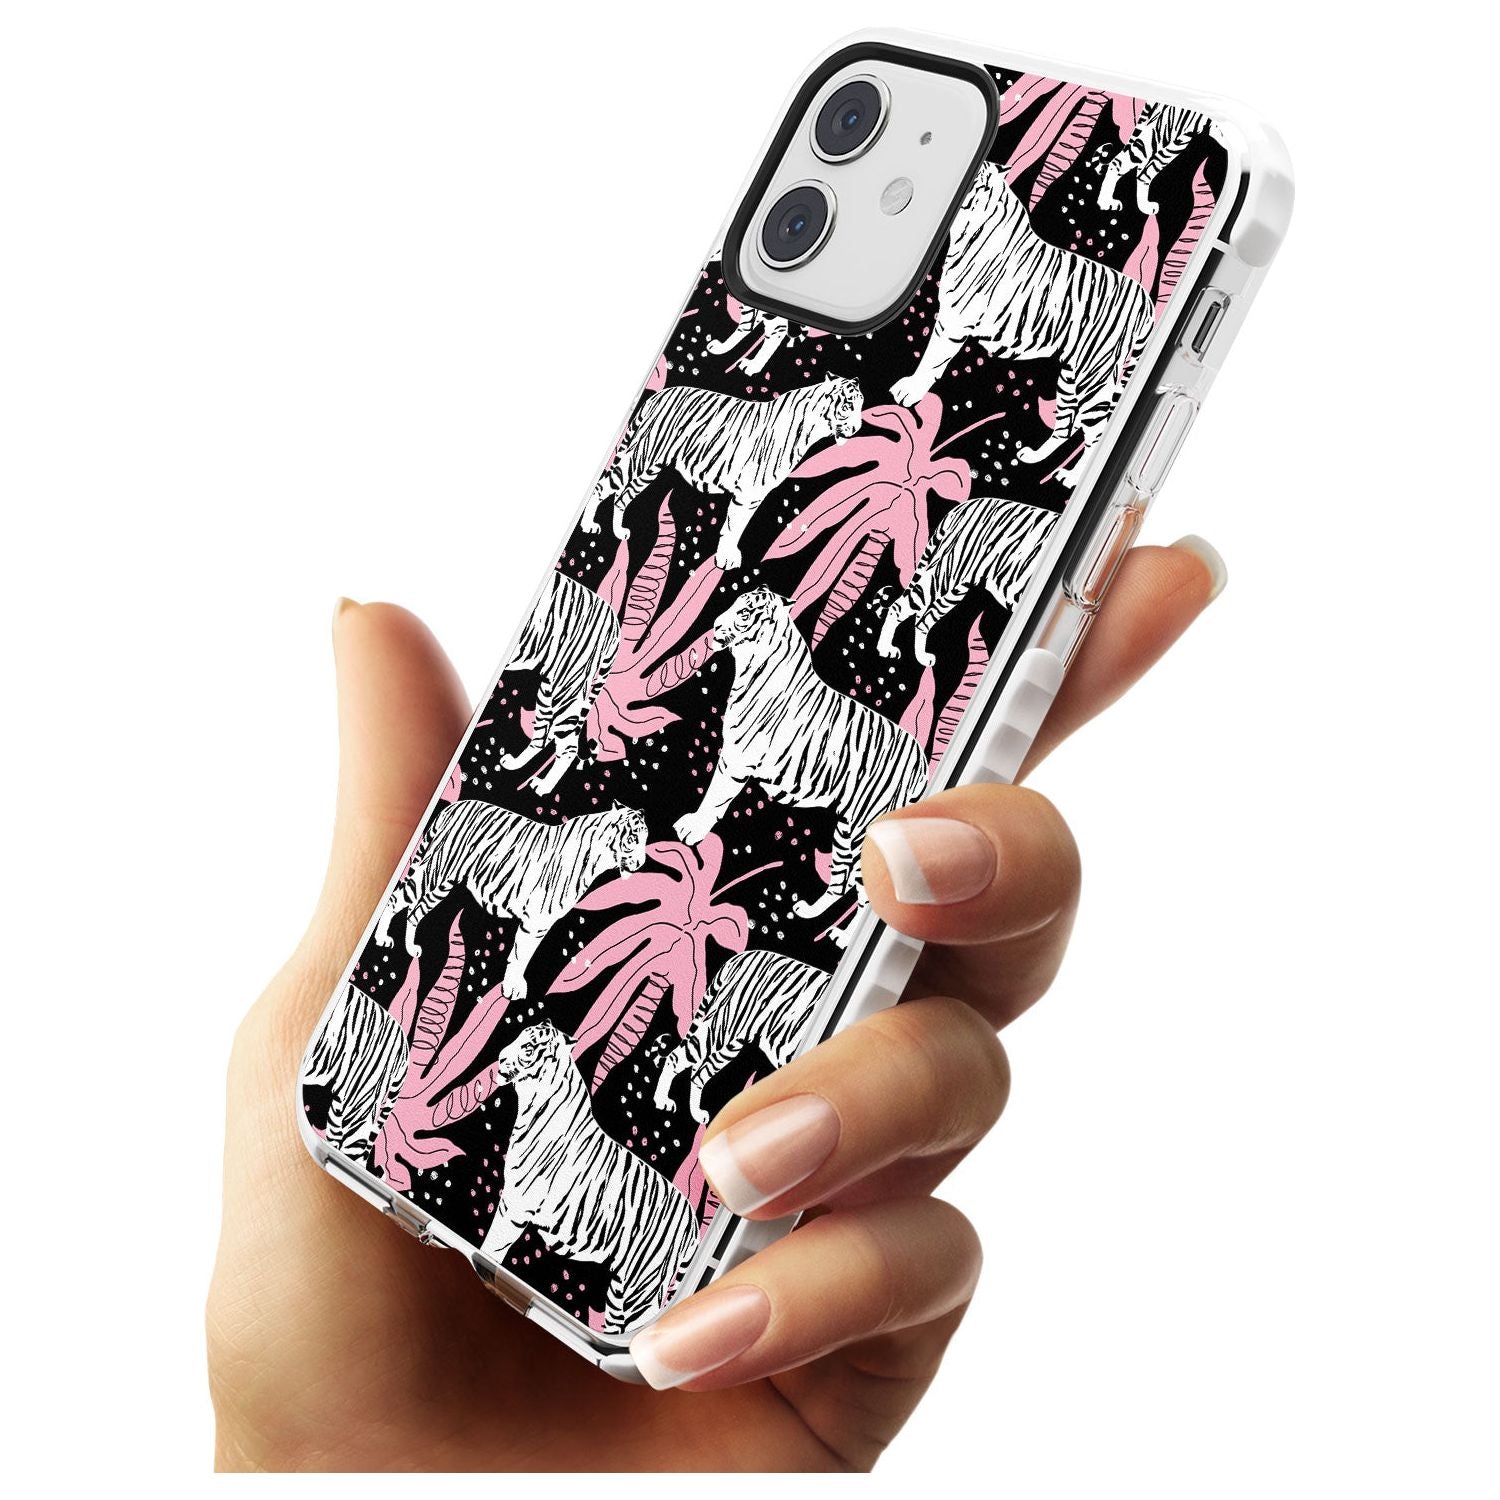 White Tigers on Black Pattern Impact Phone Case for iPhone 11